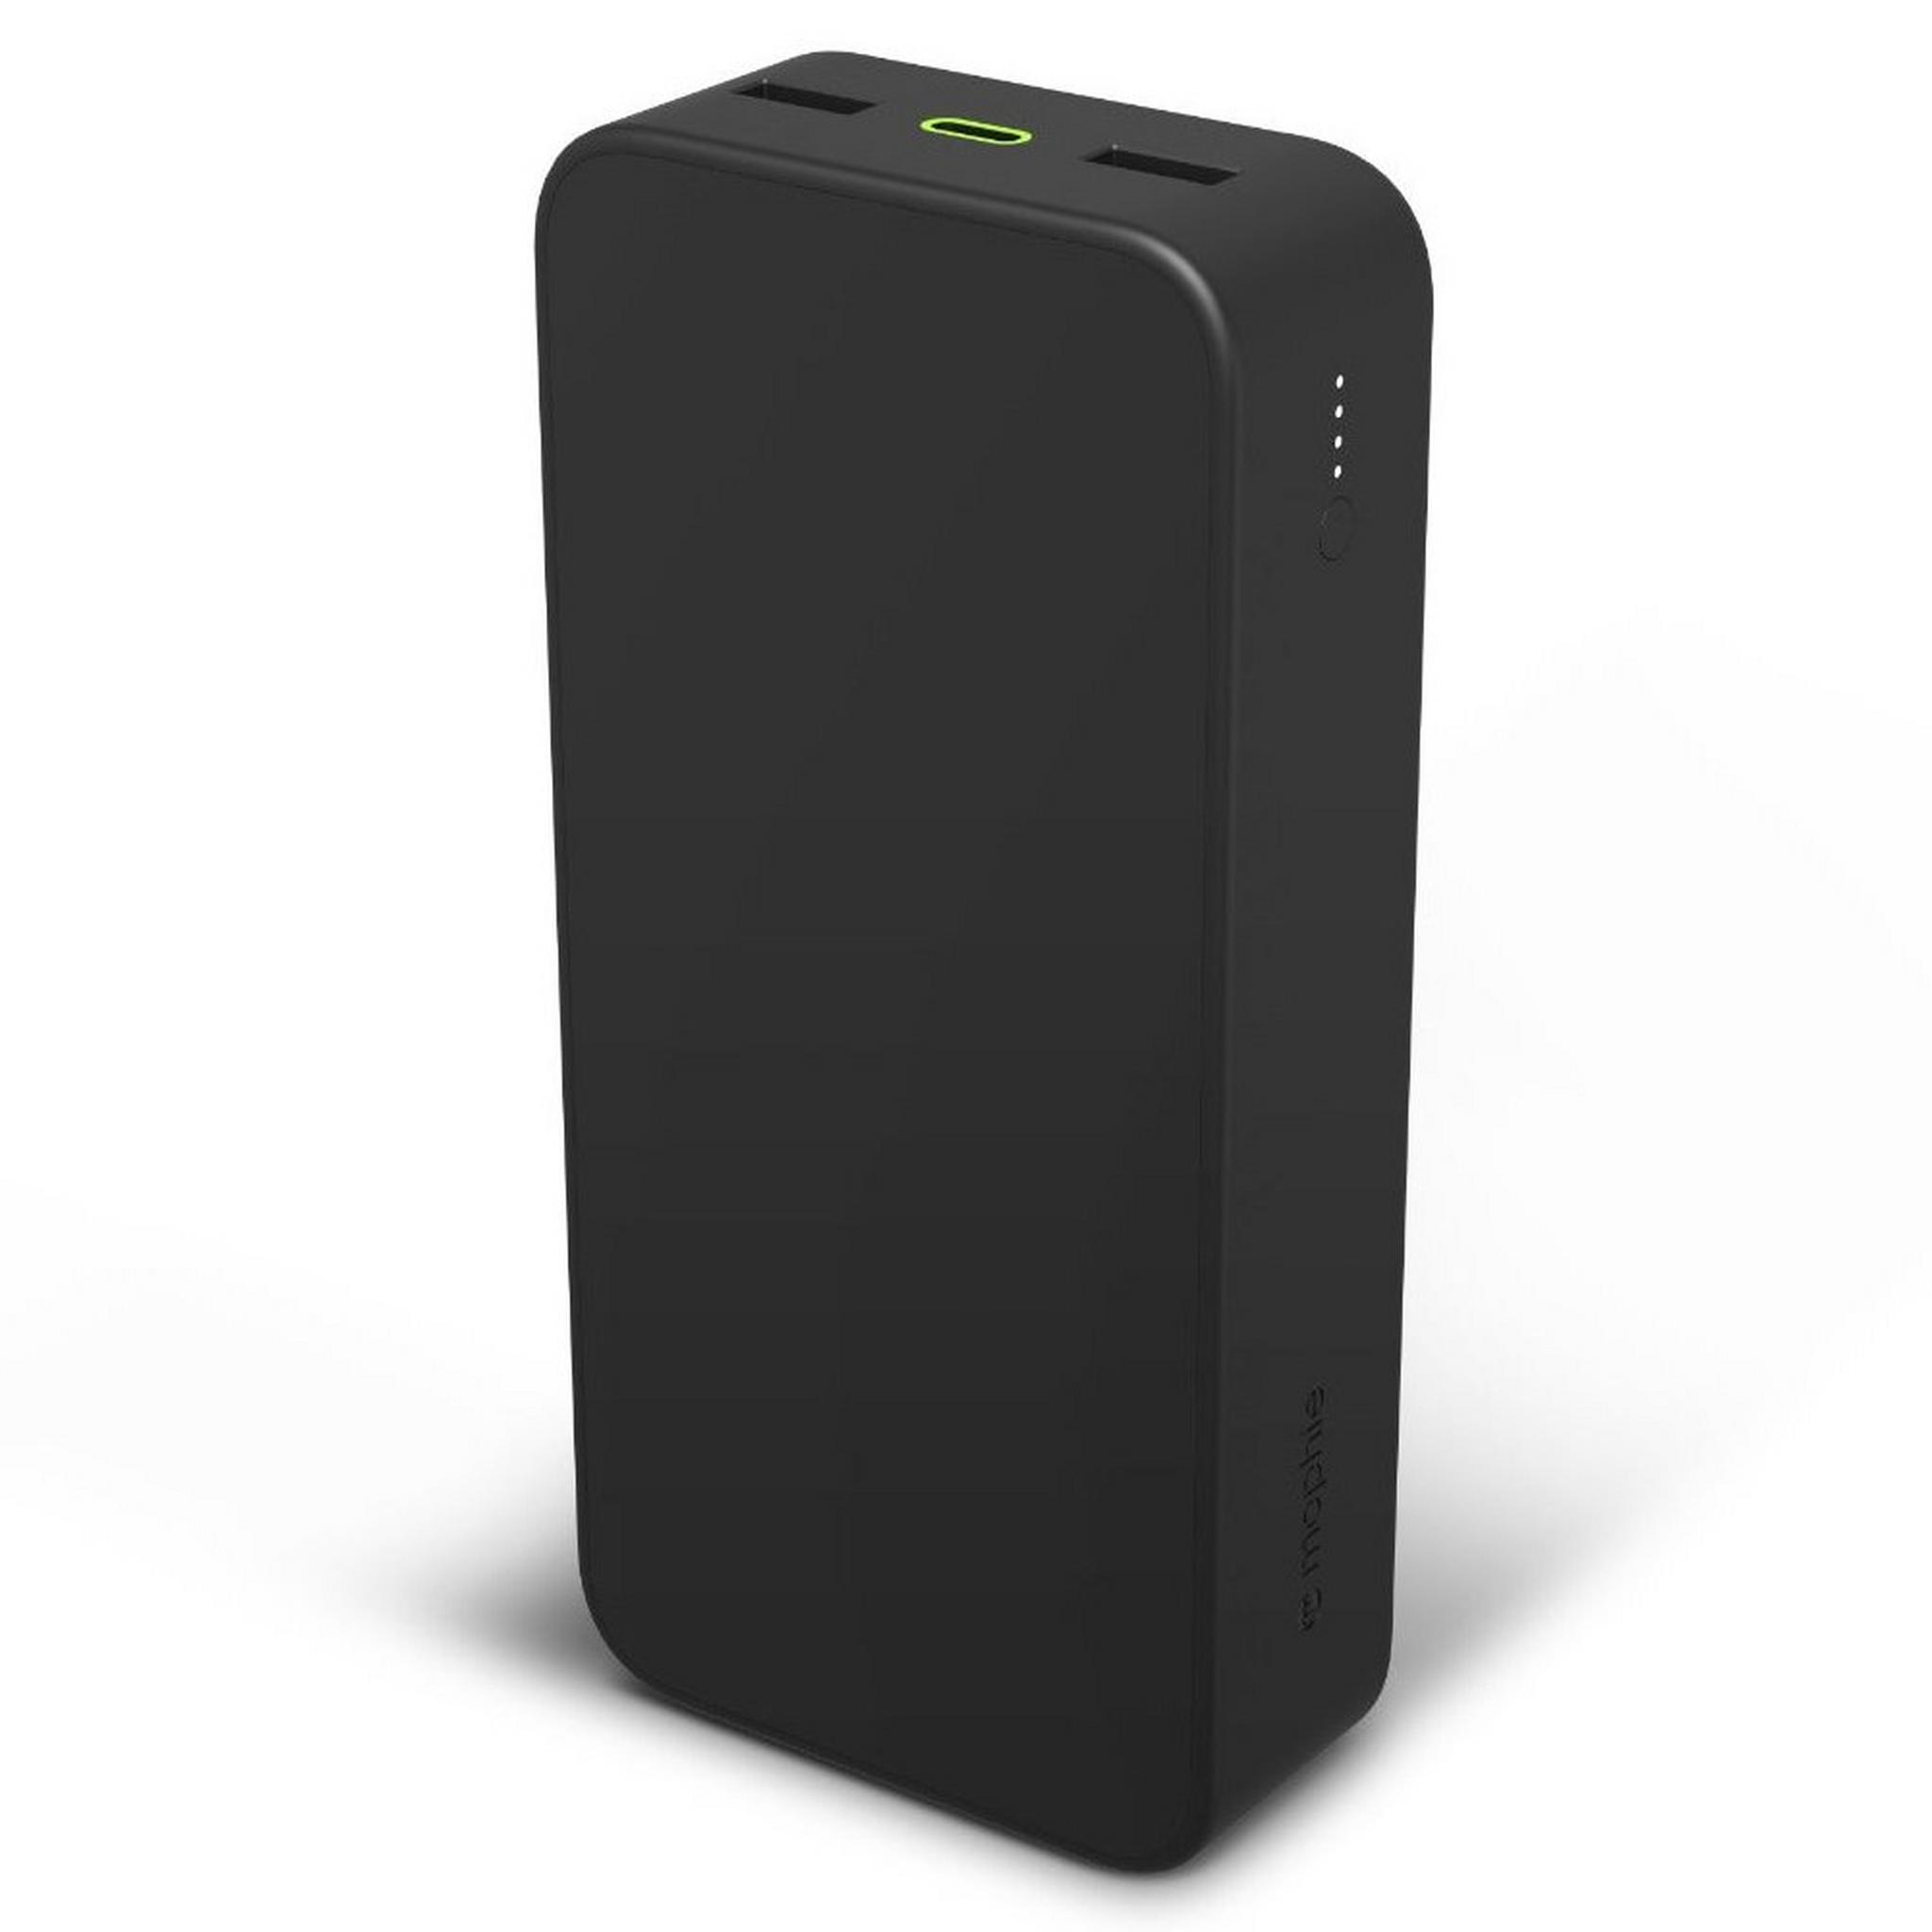 Mophie 10,000 mAh Powerstation with PD Power Bank, 401110786 – Black